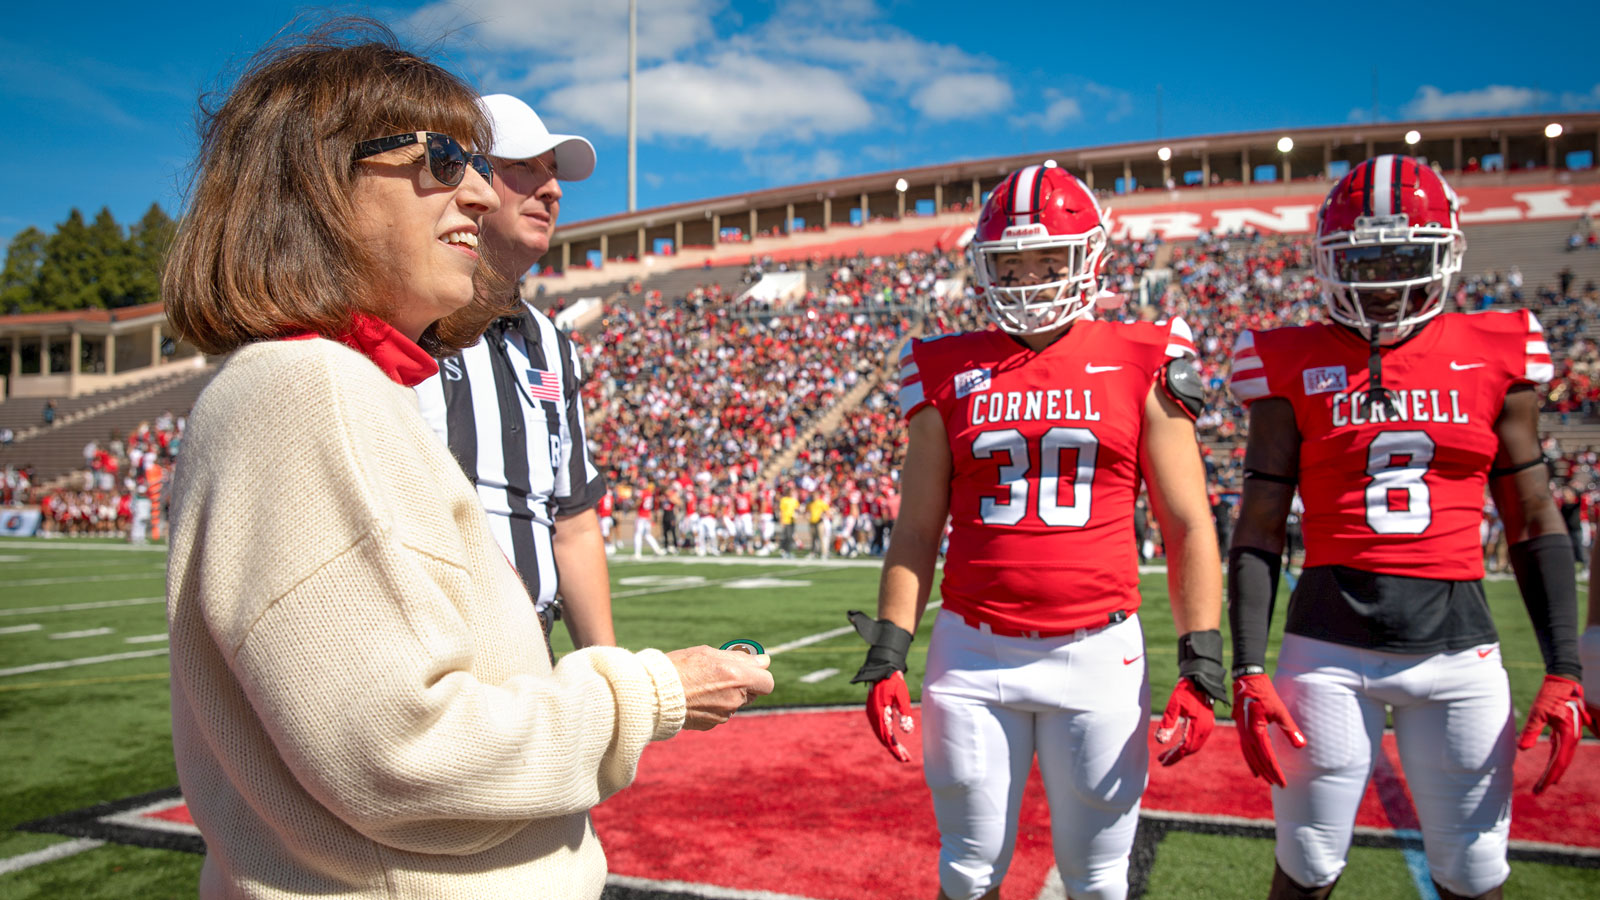 President Martha Pollack prepares for the coin toss at a Big Red football game in Schoellkopf in 2022